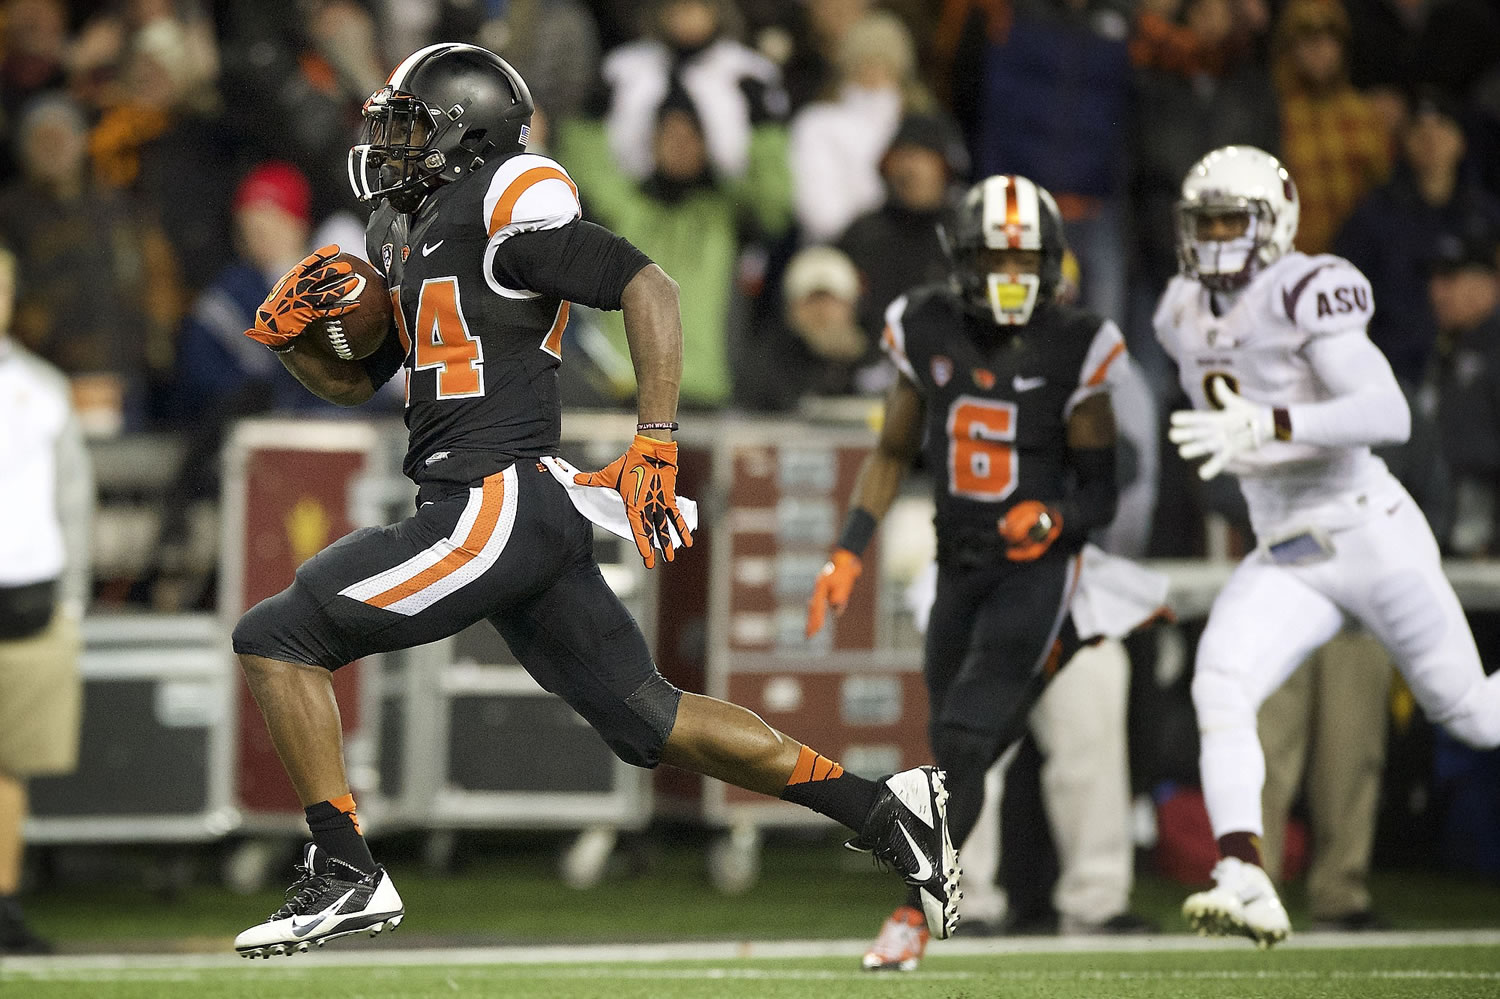 Oregon State tailback Storm Woods (24) scores a touchdown against Arizona State during the first quarter  in Corvallis, Ore., Saturday, Nov. 15, 2014.